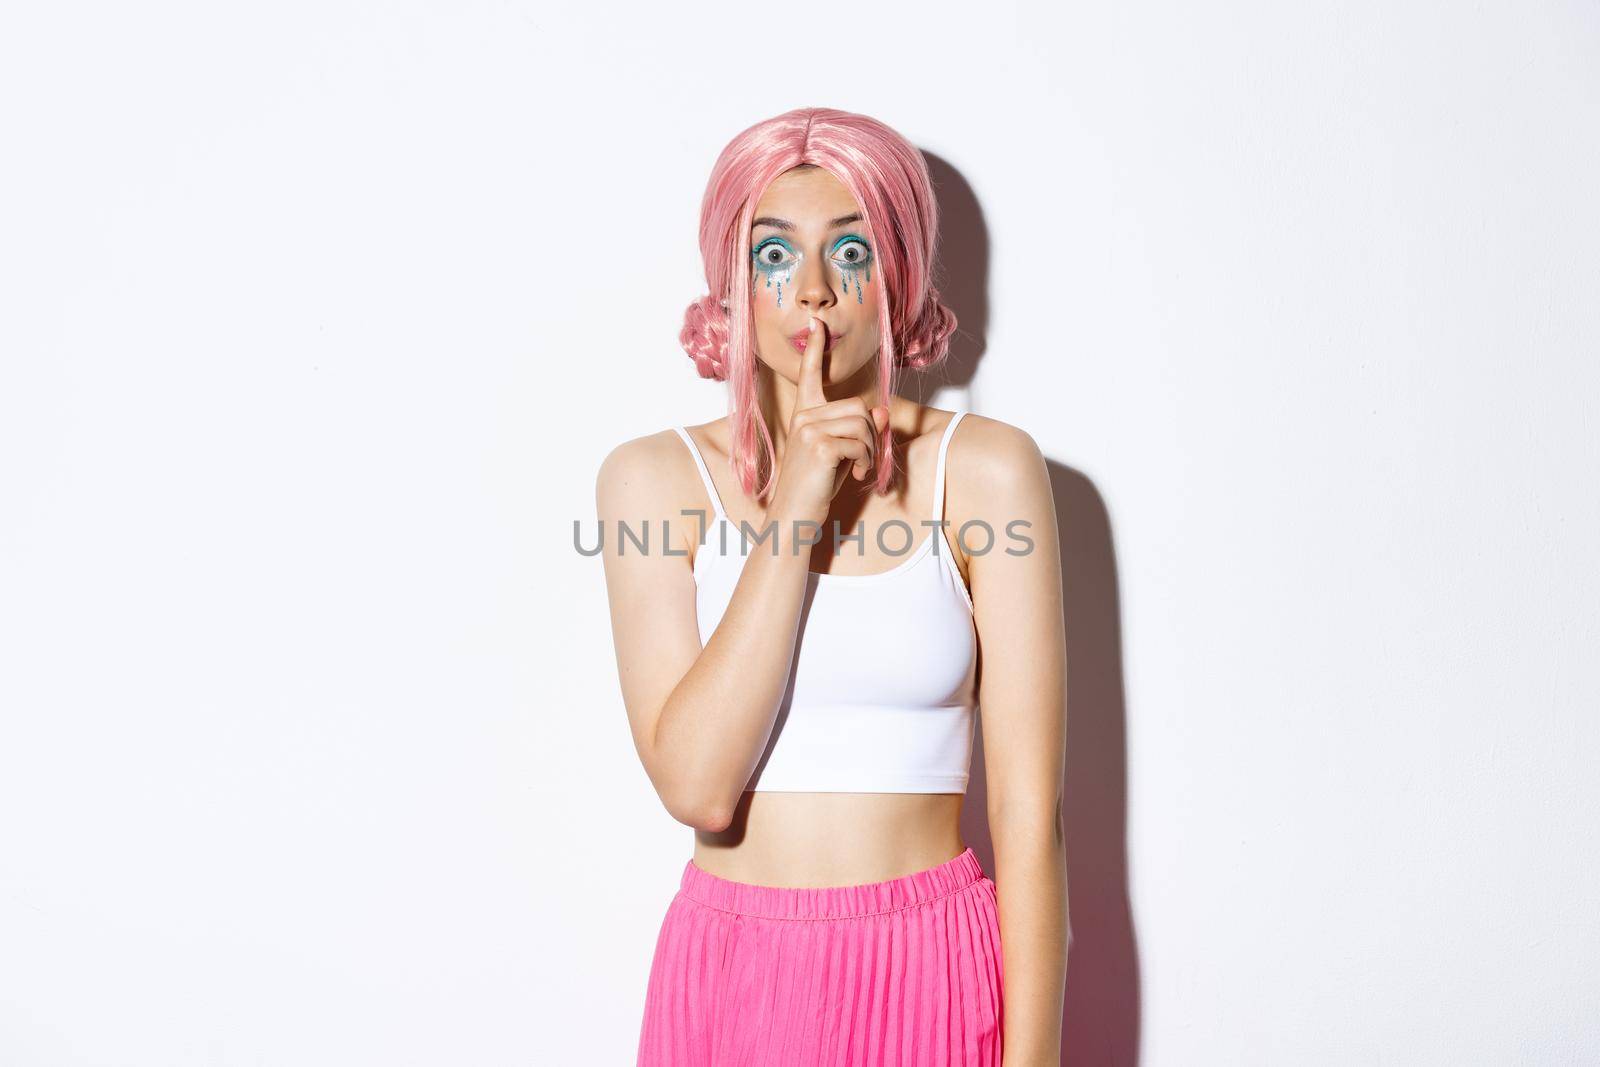 Worried attractive girl in pink anime hair and glitter, asking keep quiet, showing shush sign, press index finger to lips and looking concerned. Woman share a secret, standing over white background.